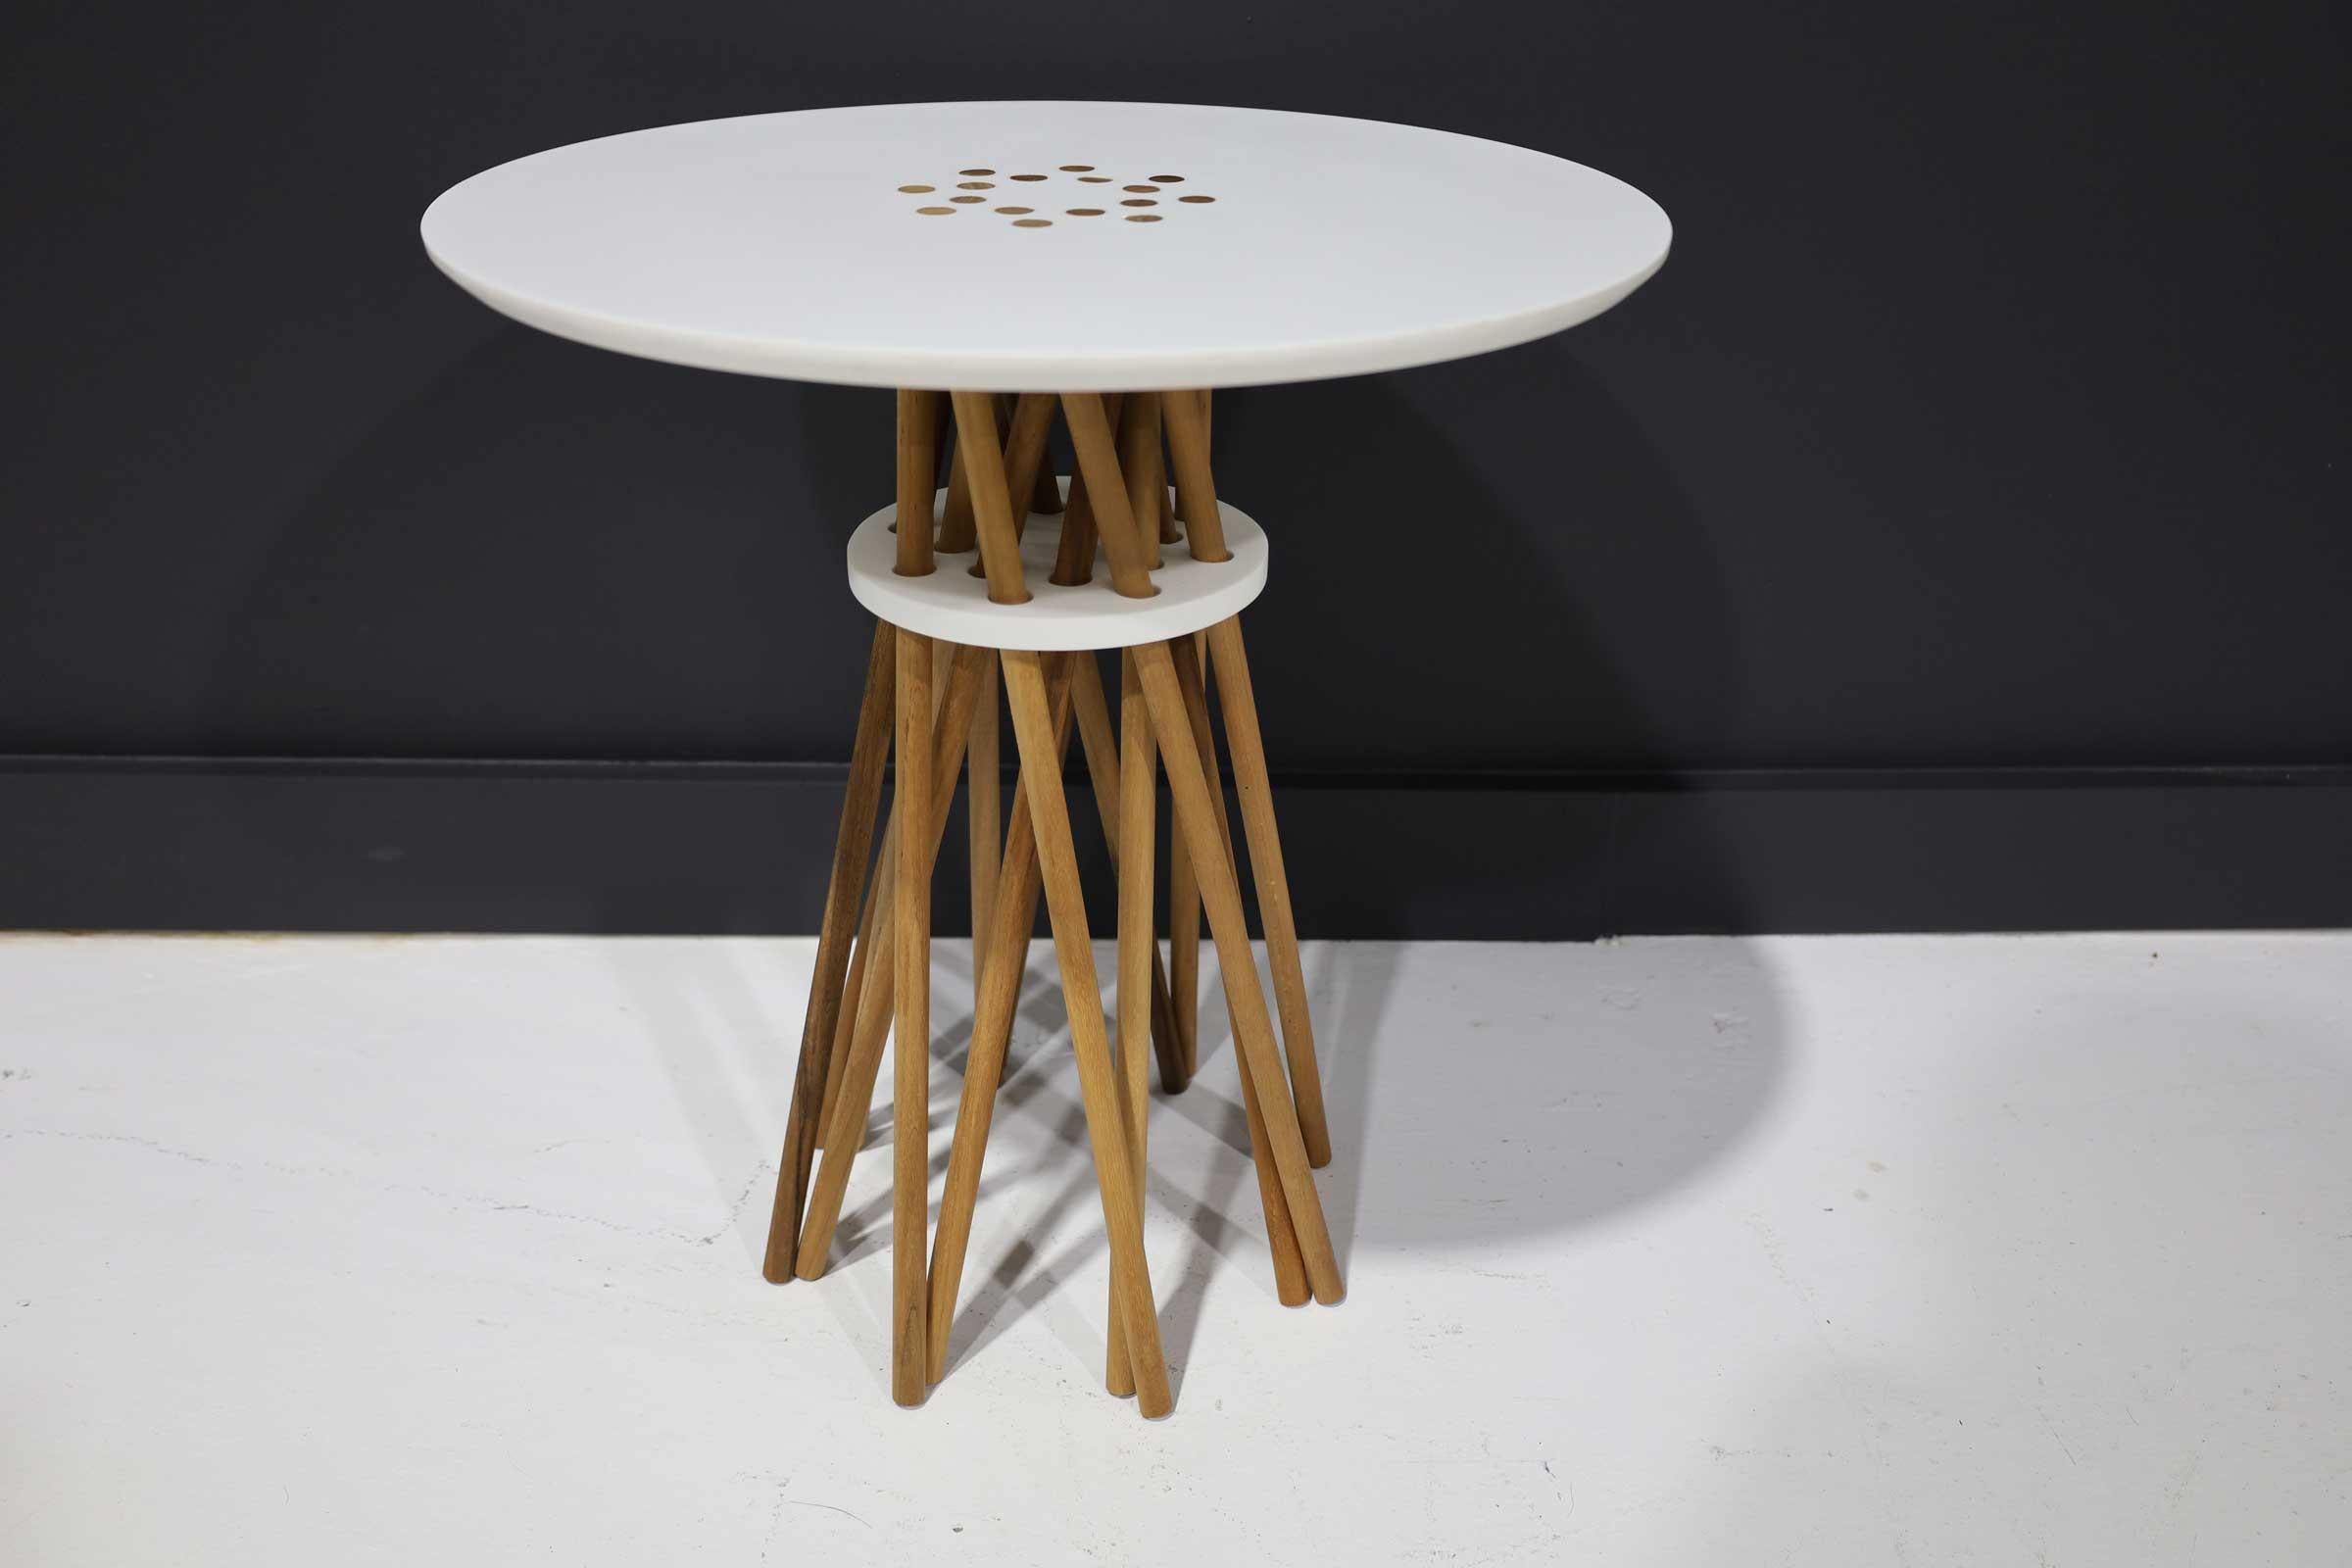 A fantastic mid century side table with spindle legs and a corian top. Well constructed. Signed 